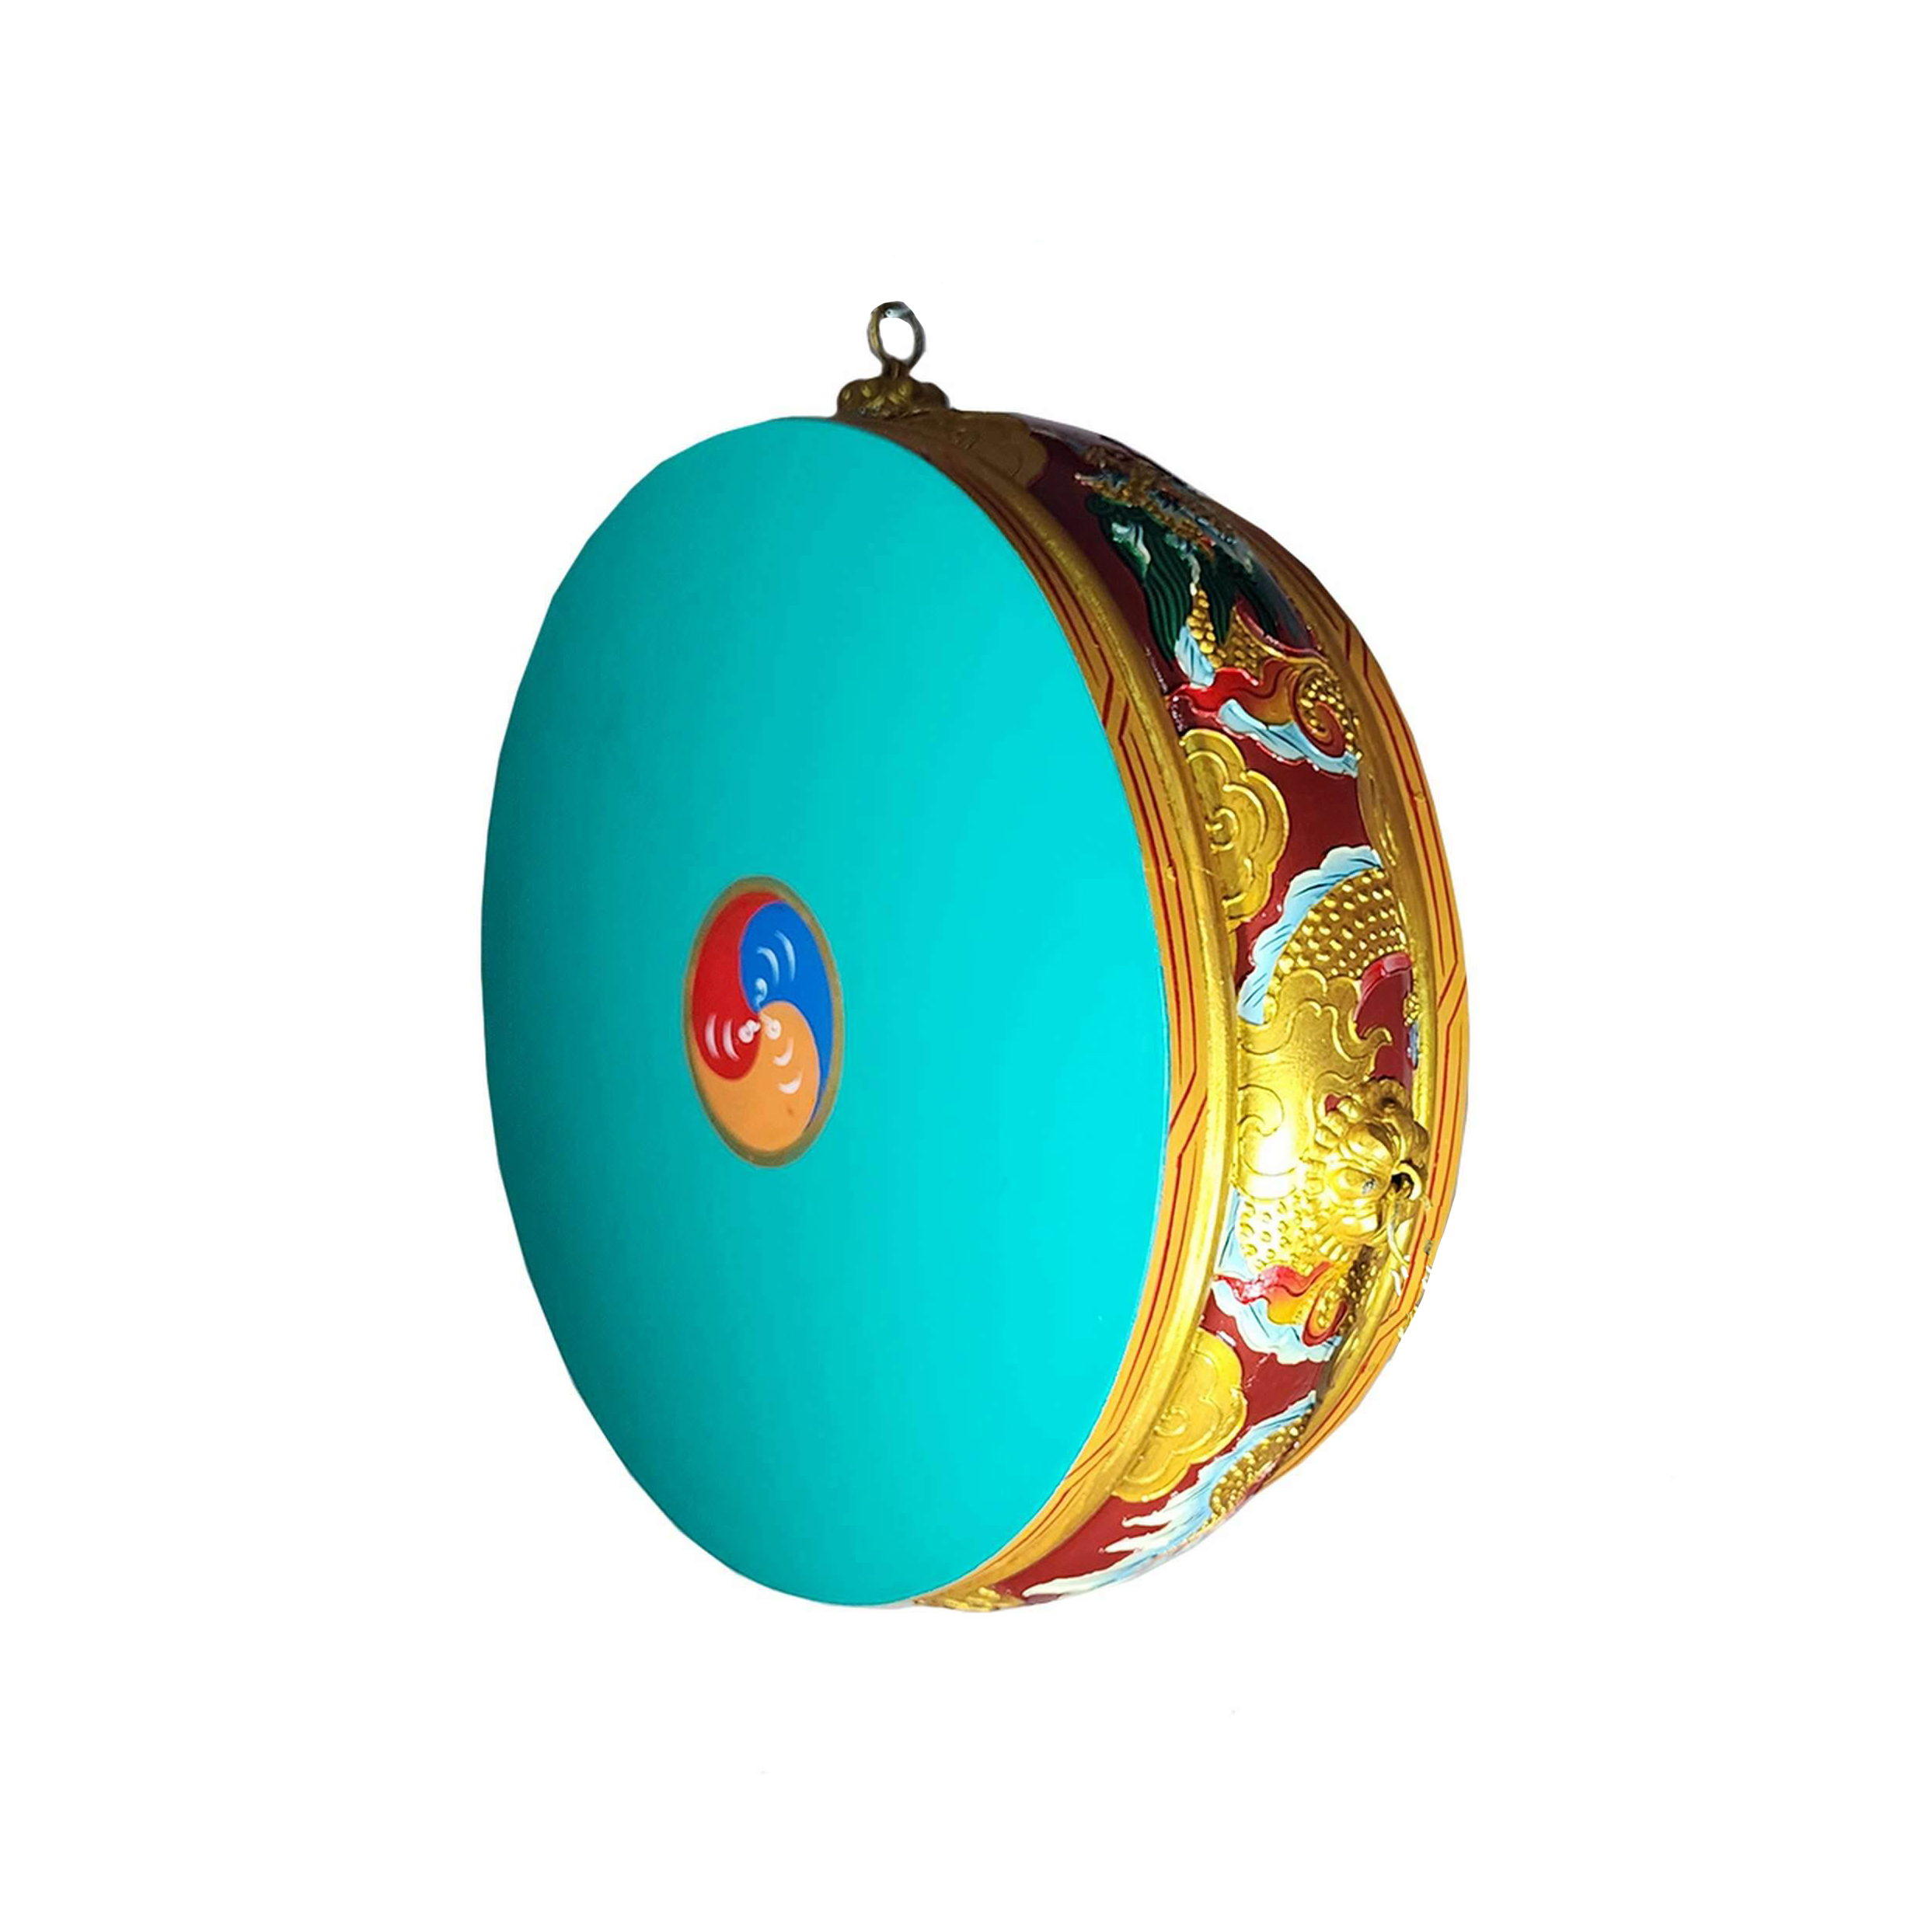 High-quality Tibetan Monastery Drum dhyangro - Traditional Painted Colors